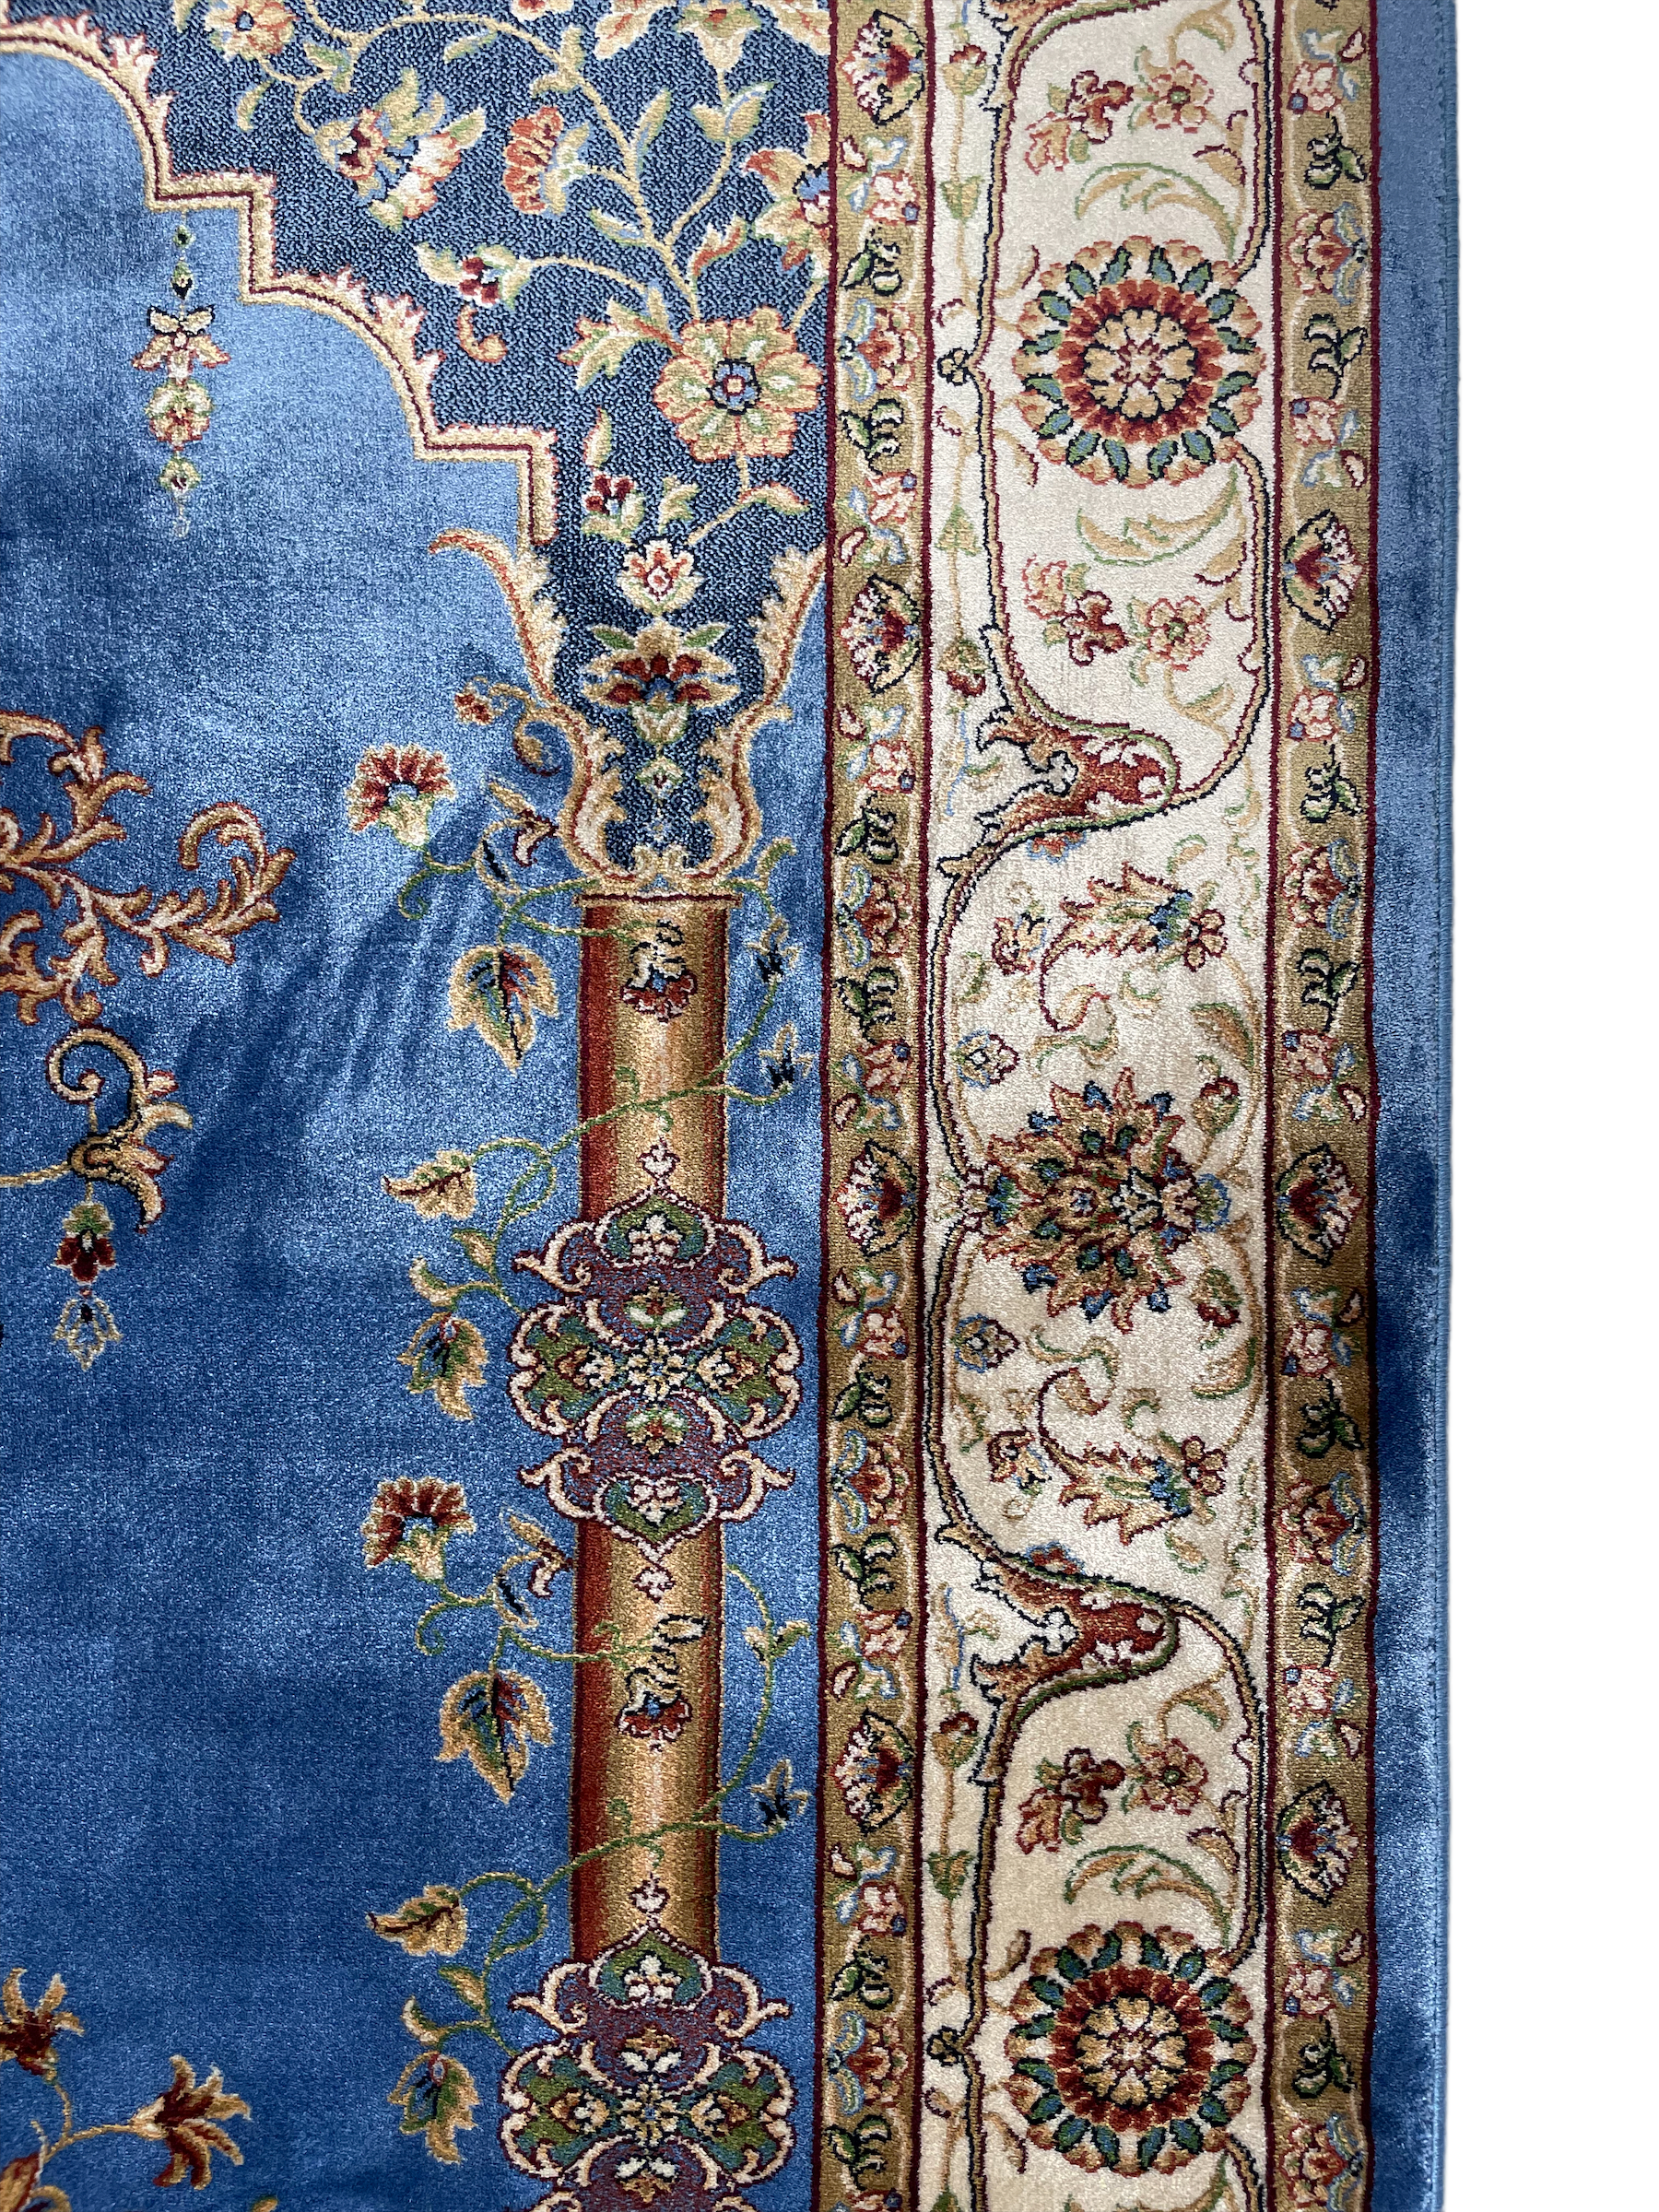 The Salik rug displays the traditional Islamic "mihrab" design with additional classic design elements. 